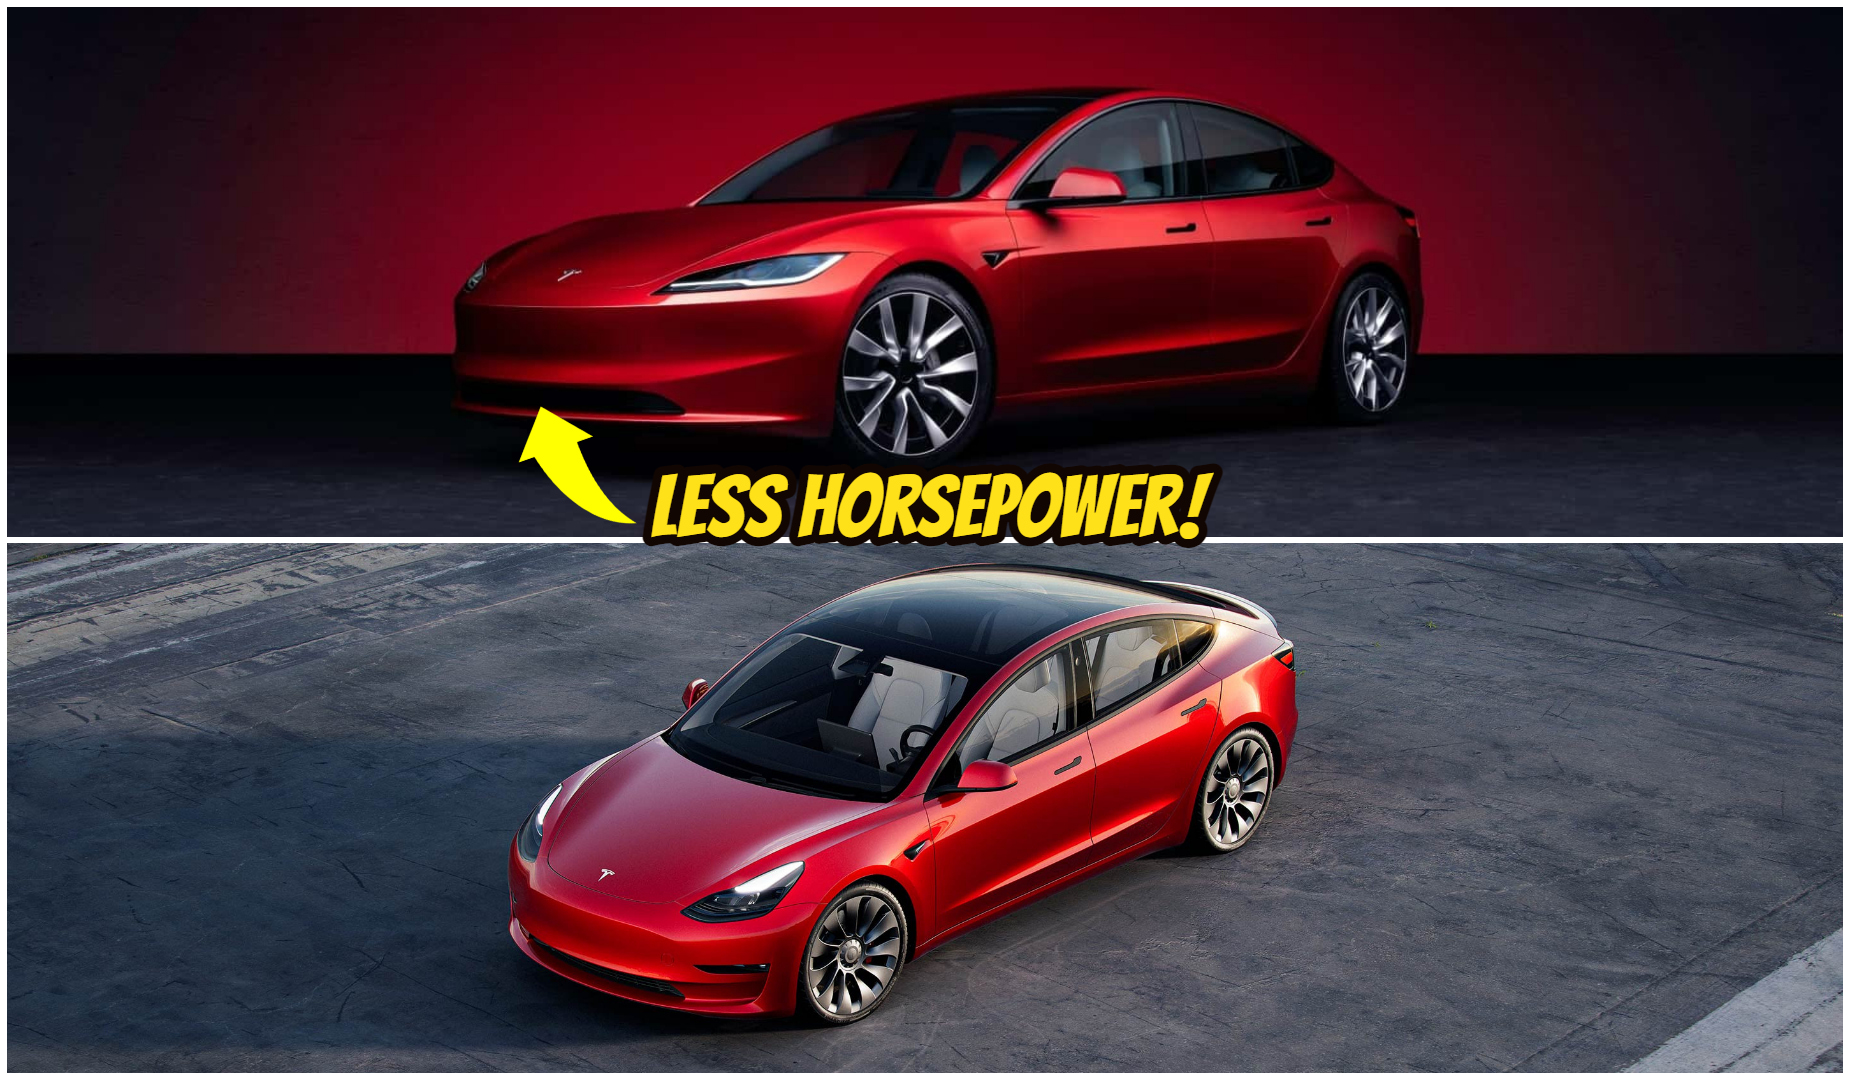 https://s1.cdn.autoevolution.com/images/news/it-s-official-facelifted-tesla-model-3-is-less-powerful-than-its-predecessor-220928_1.jpg